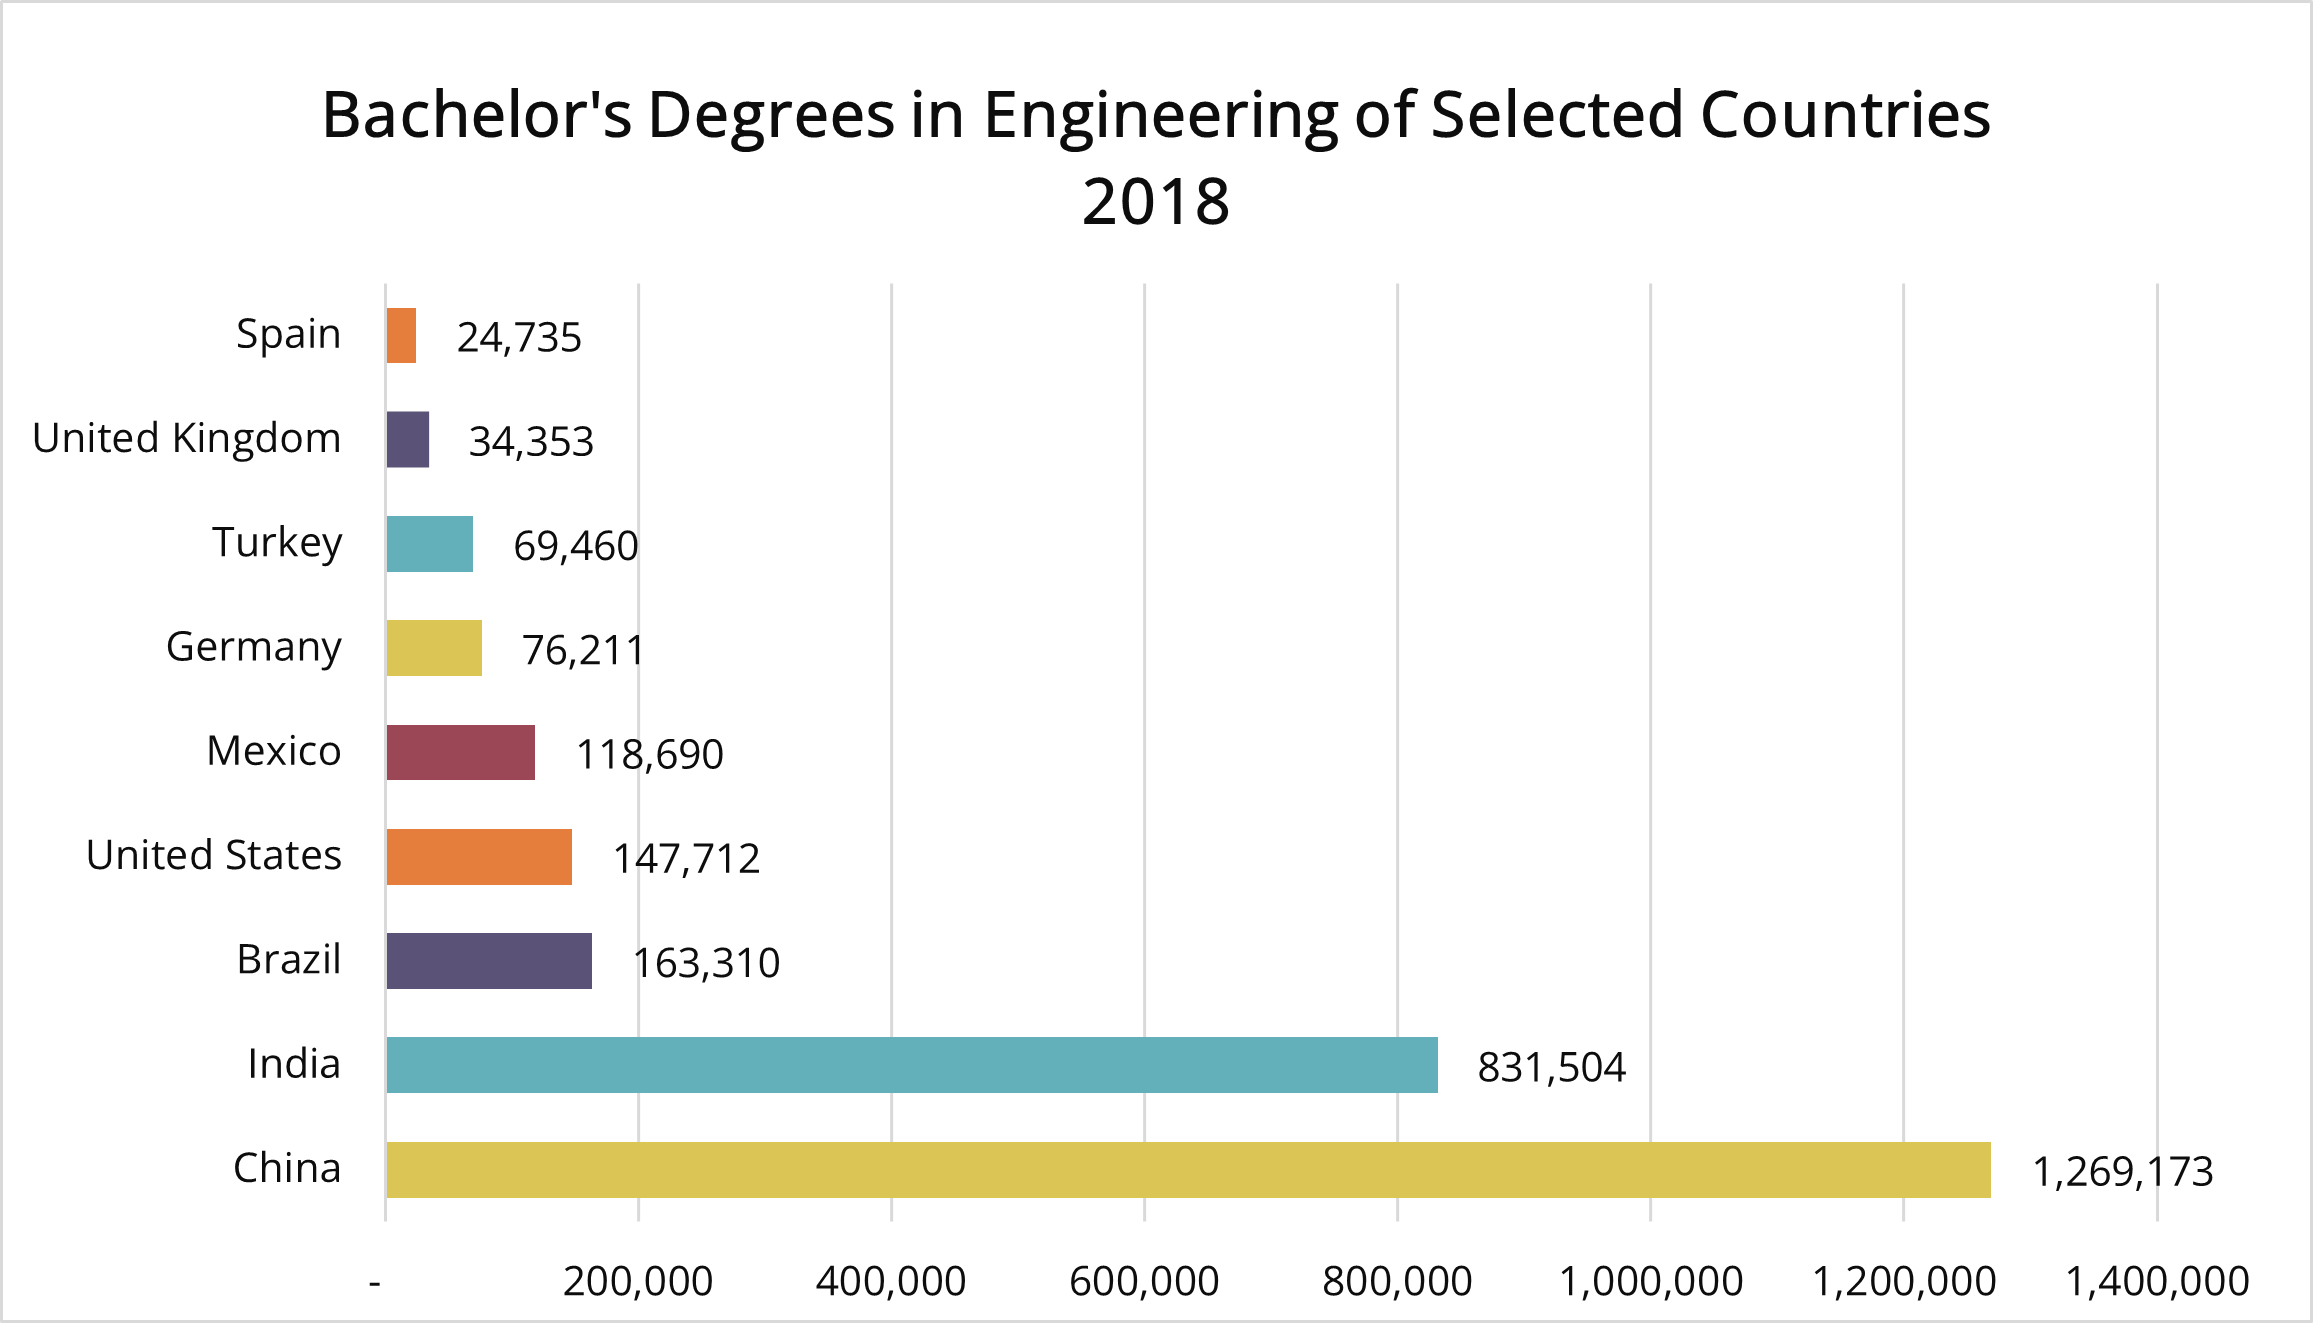 Bar graph showing number of bachelors in engineering degree by country